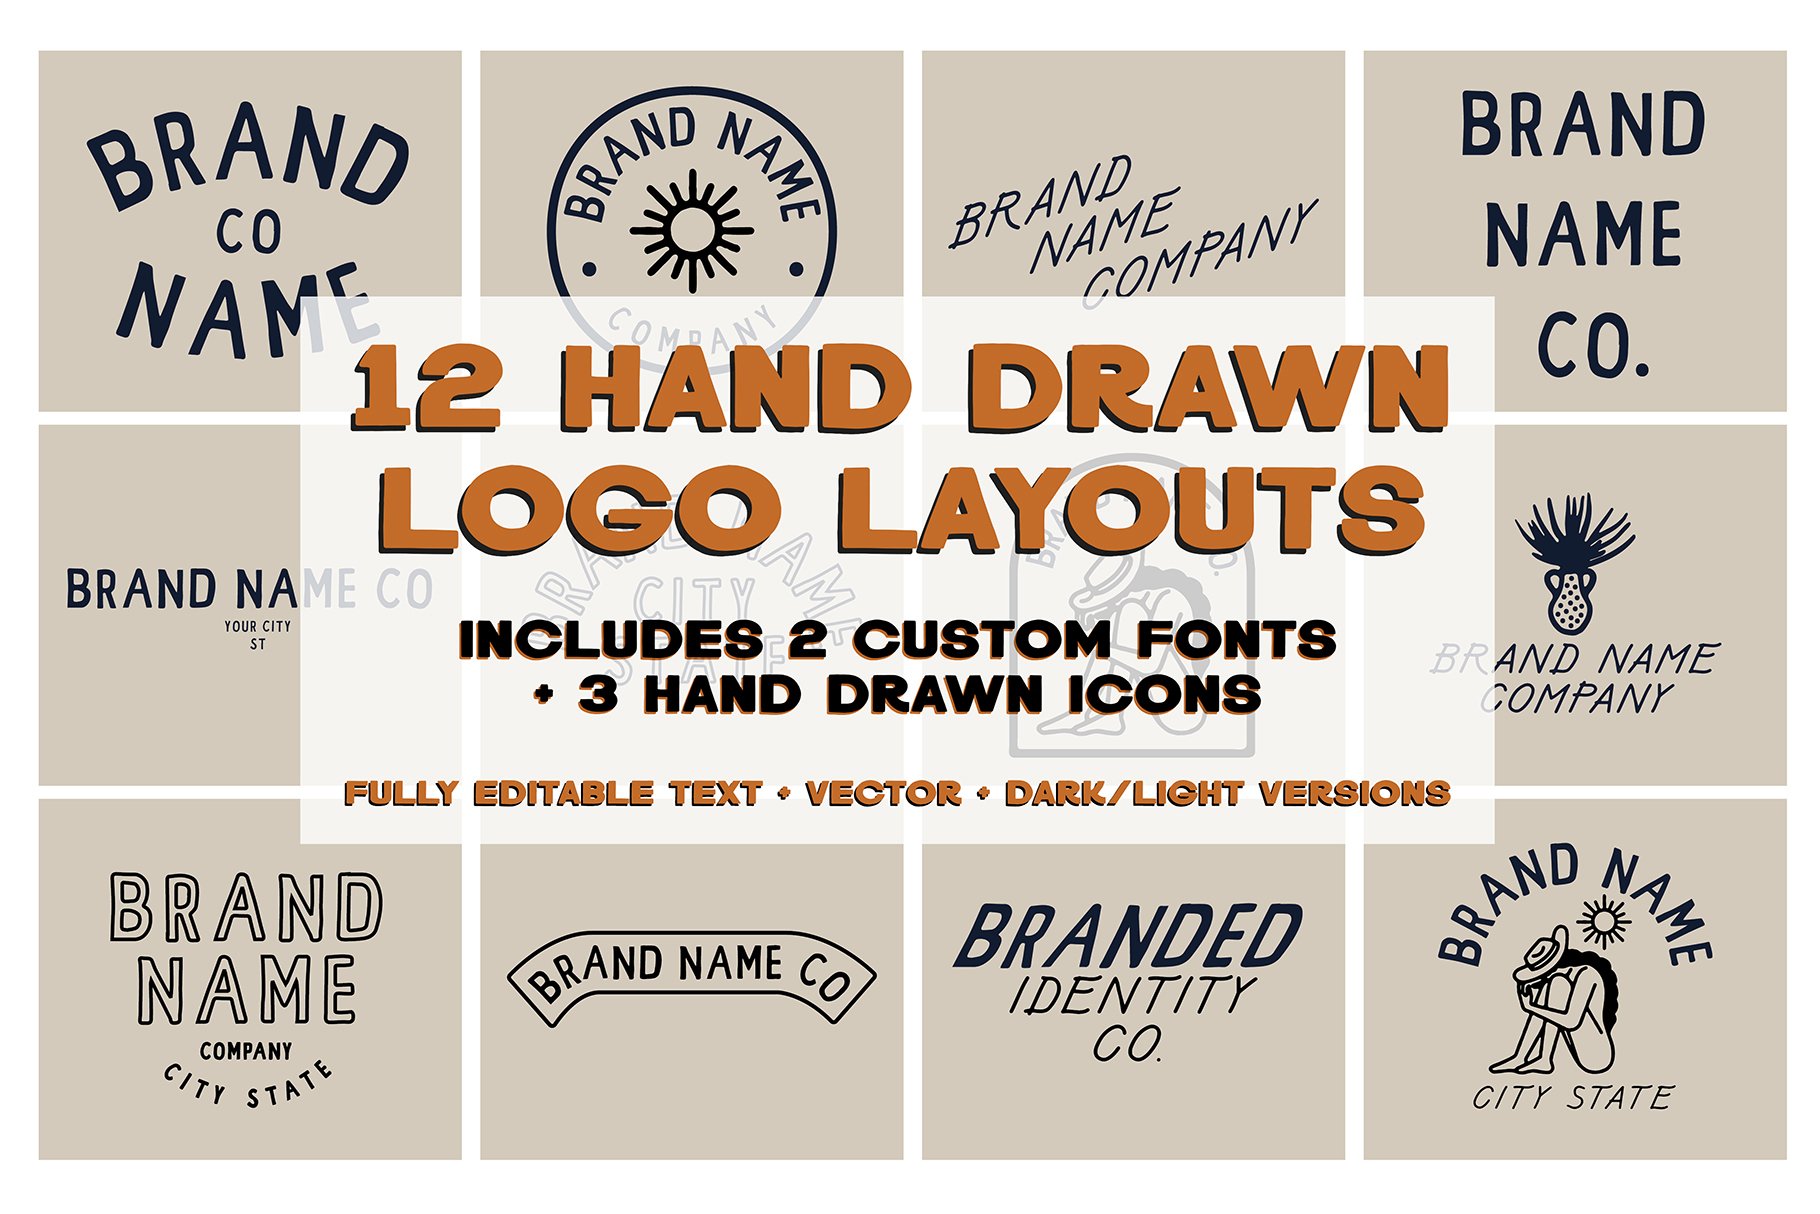 Hand Drawn Branding Layout Templates cover image.